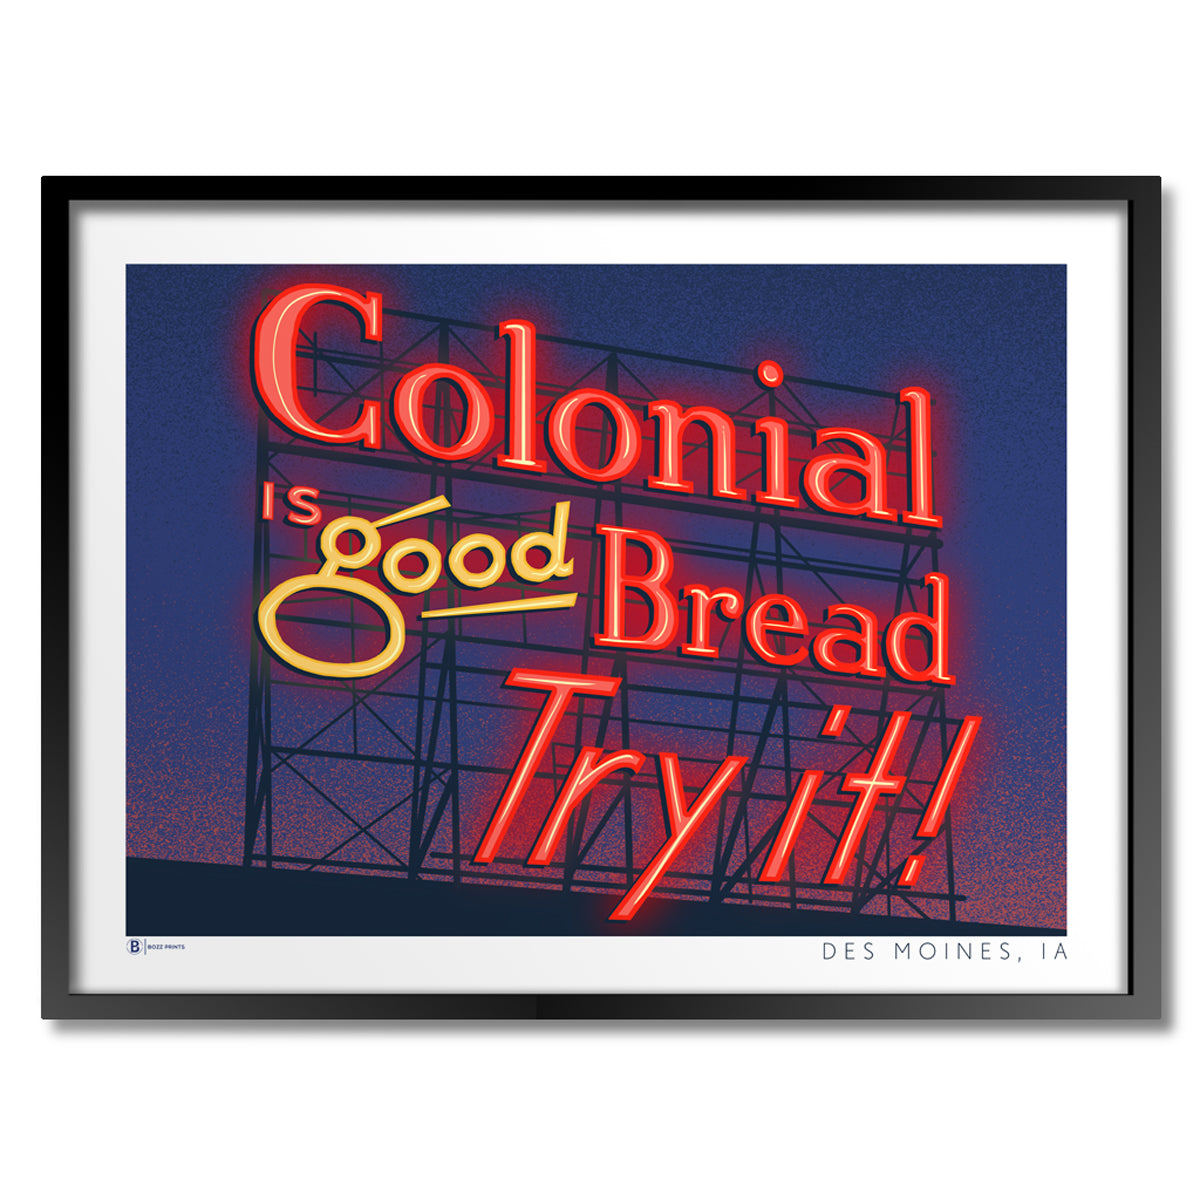 Des Moines Colonial Sign at Night Print - Bozz Prints